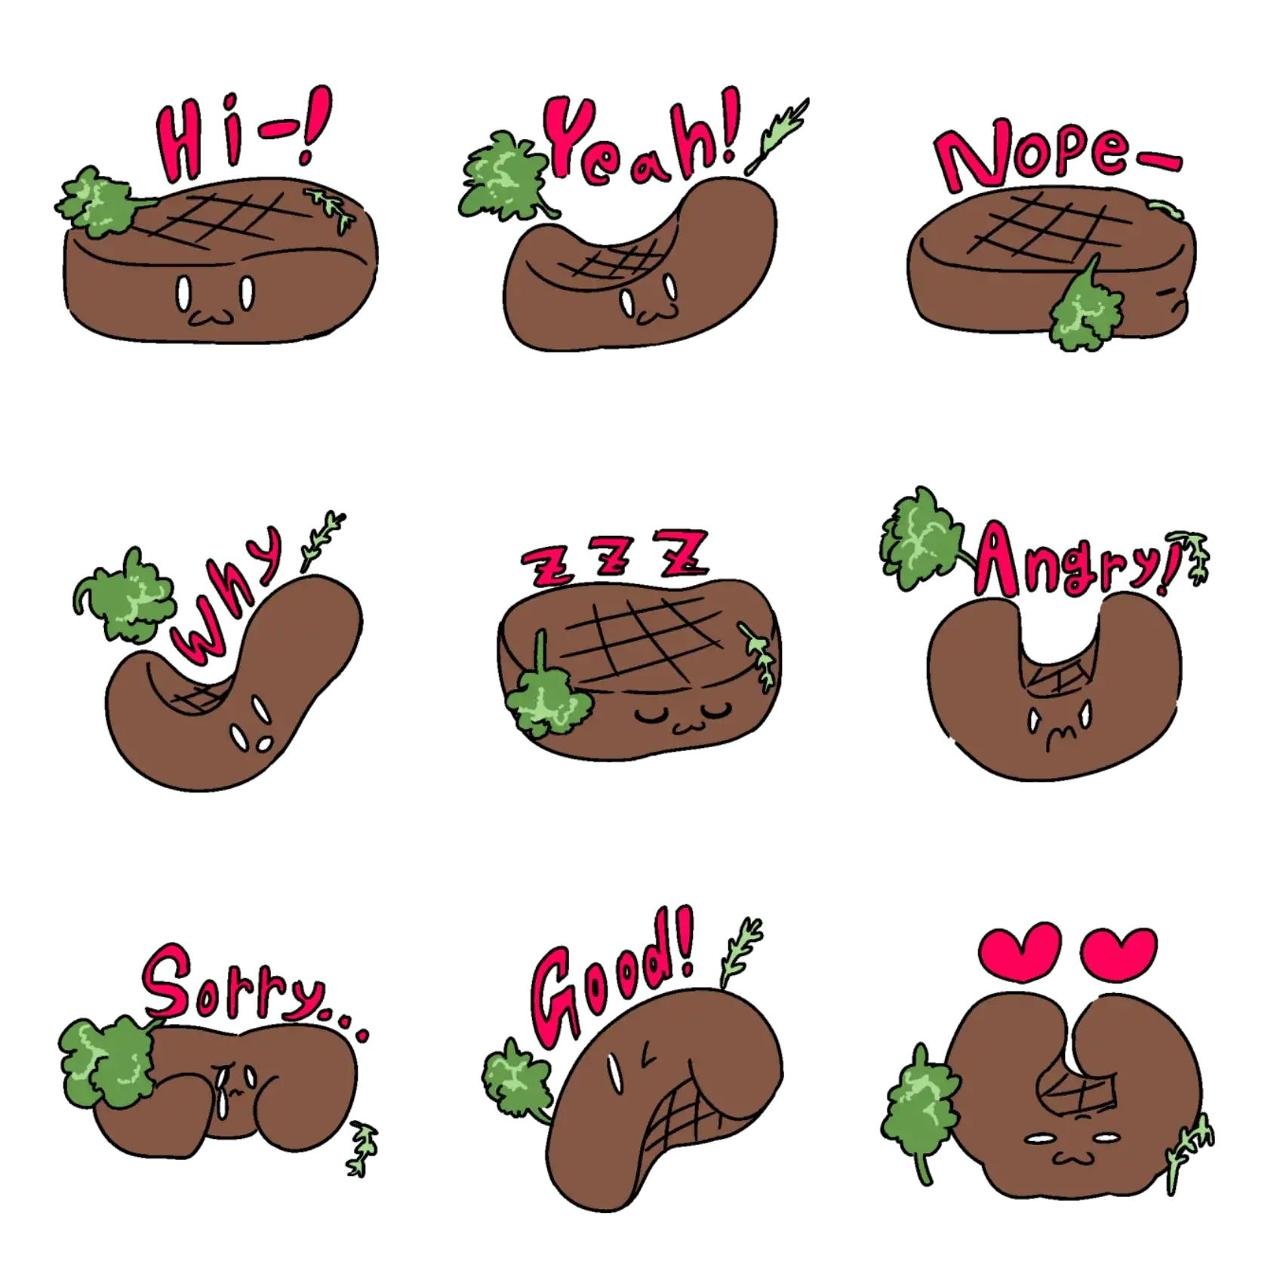 Well done steak! Animation/Cartoon,Food/Drink sticker pack for Whatsapp, Telegram, Signal, and others chatting and message apps